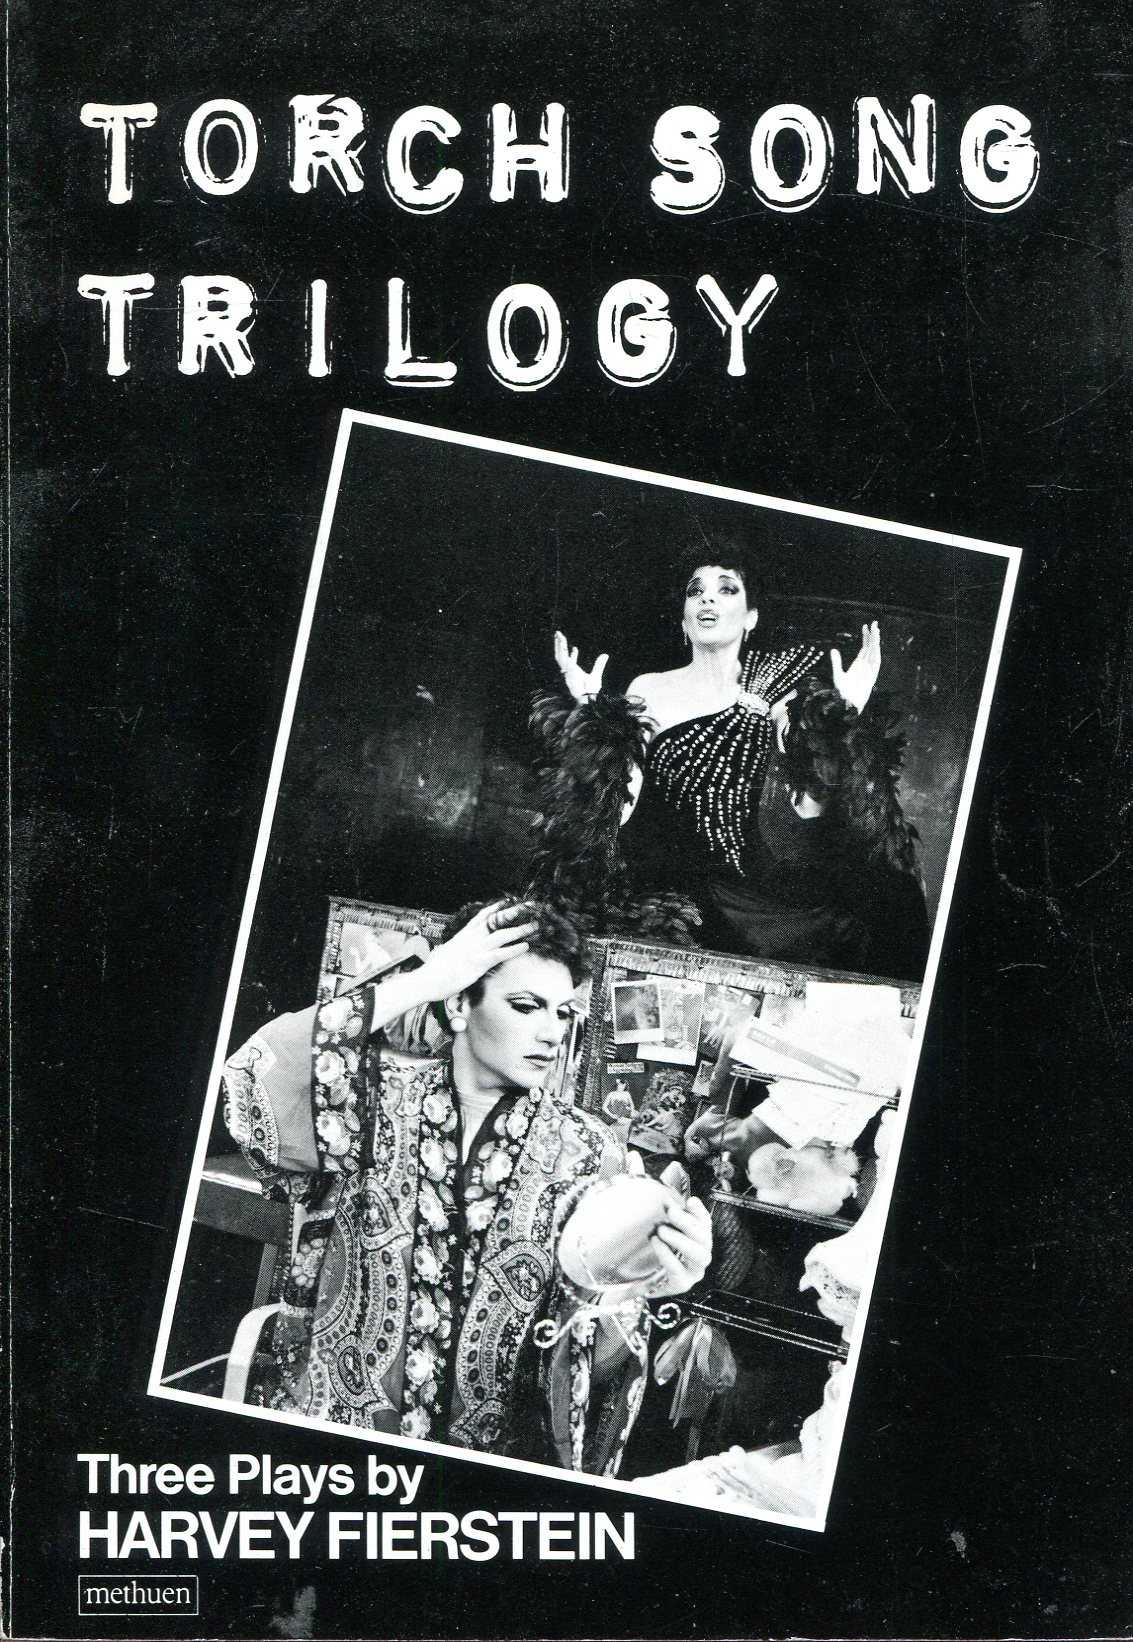 torch song trilogy on broadway